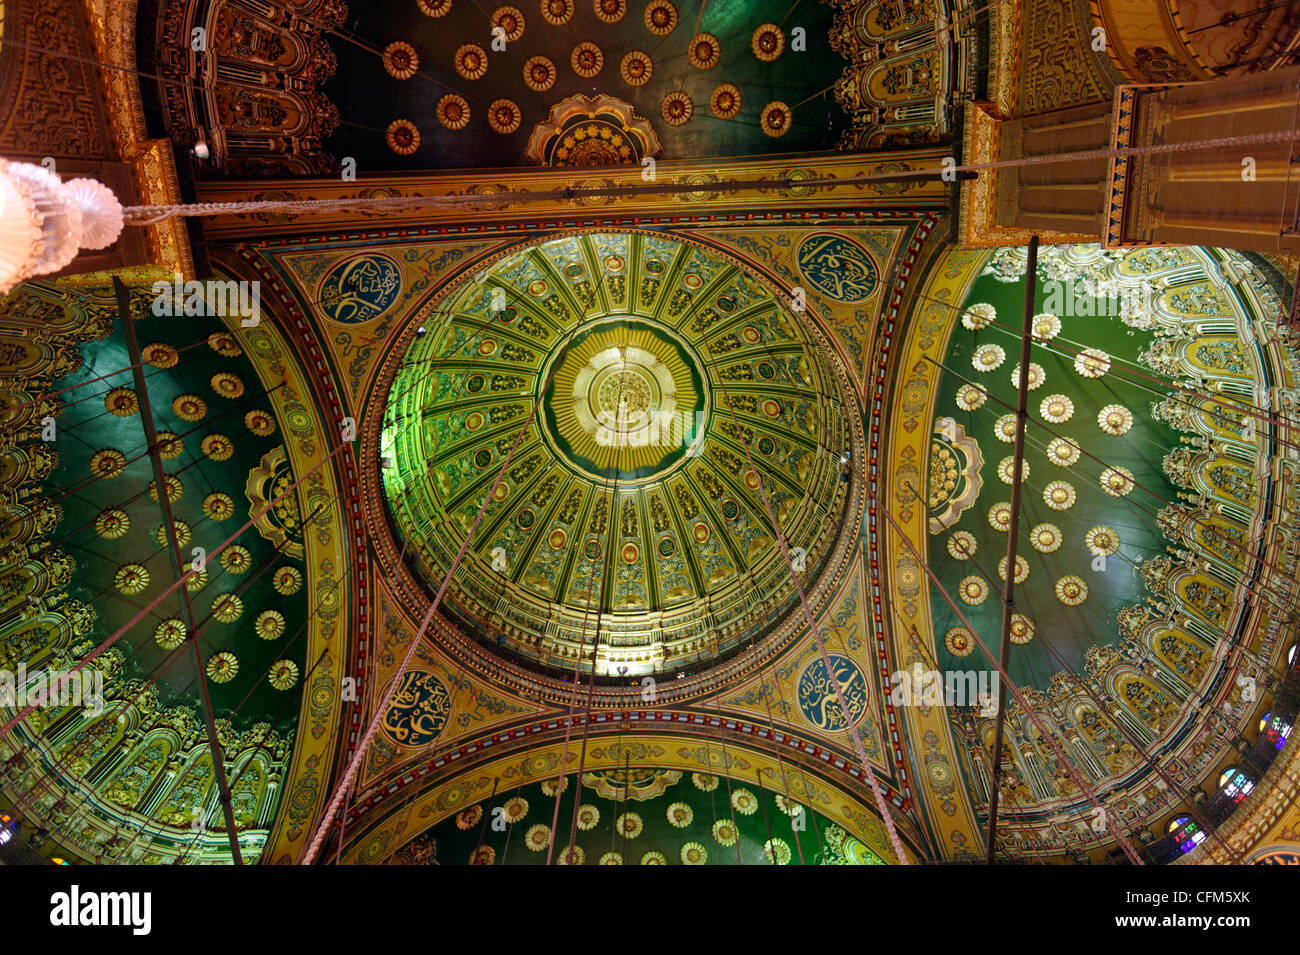 Cairo. Egypt. View of the opulently decorated ceiling and domes of the Ottoman Turkish styled Mohammed Ali Mosque at the Stock Photo